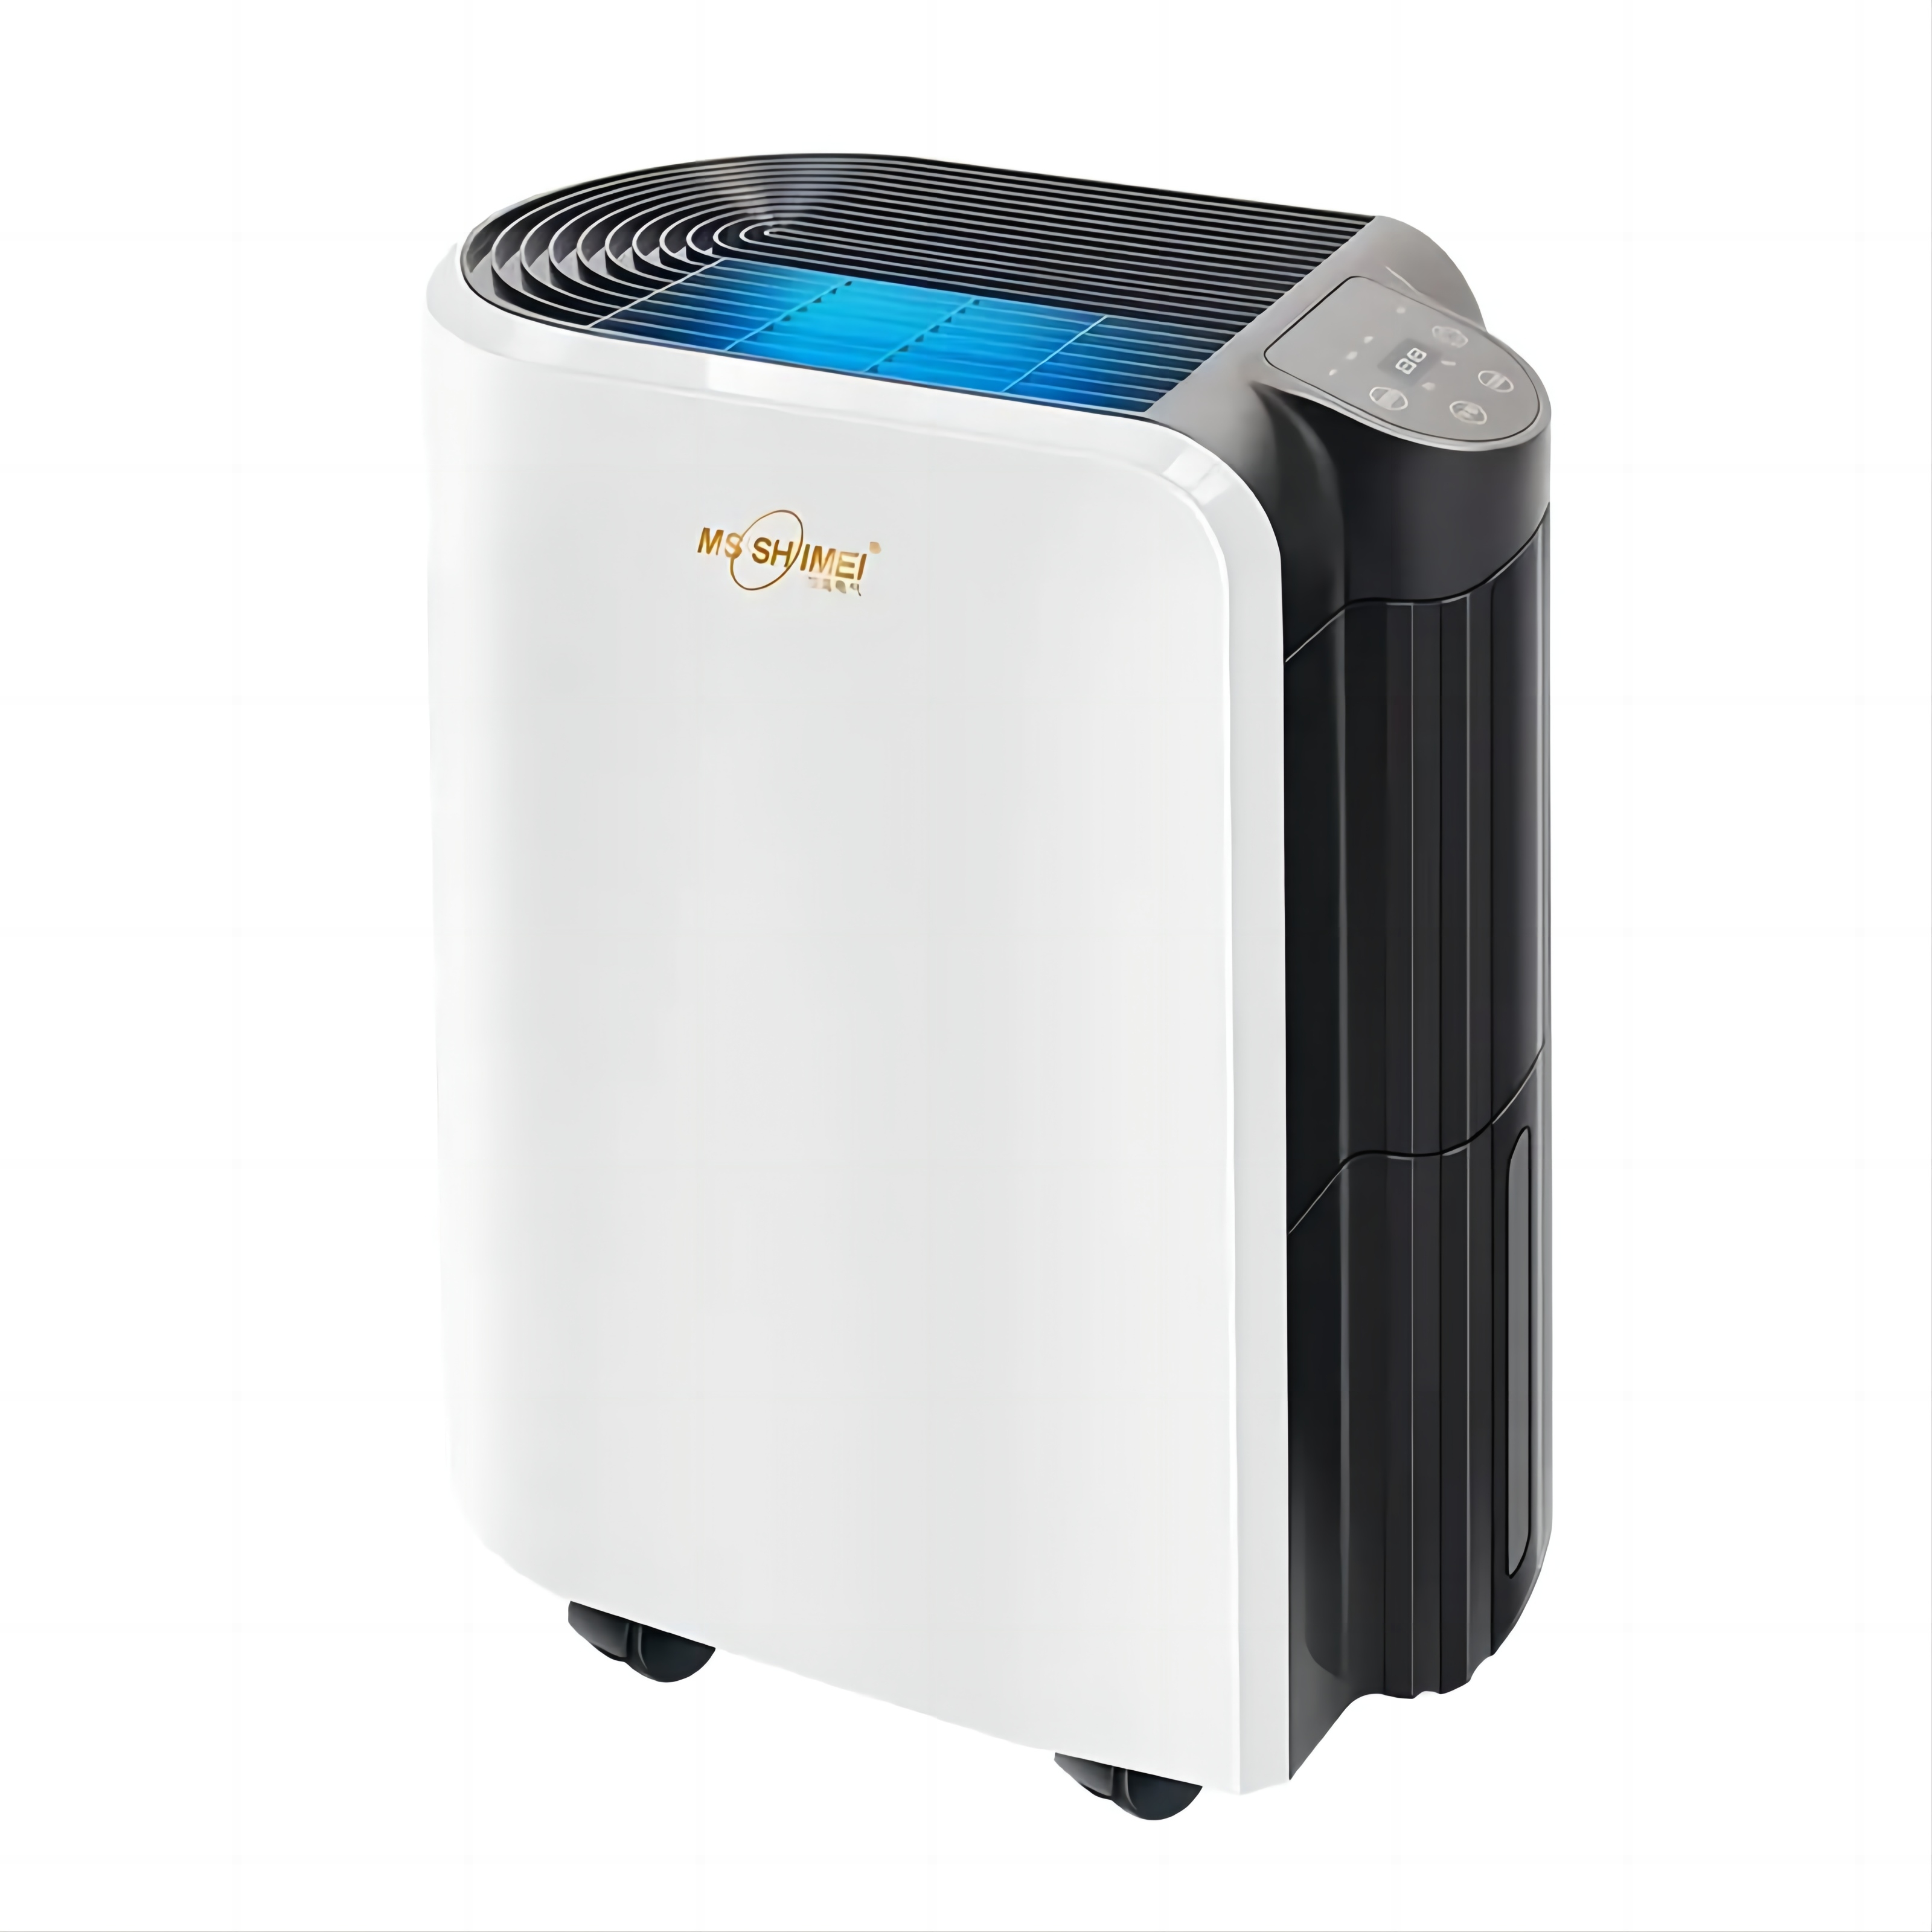 Transform your home environment with the ultimate home dehumidifier solution